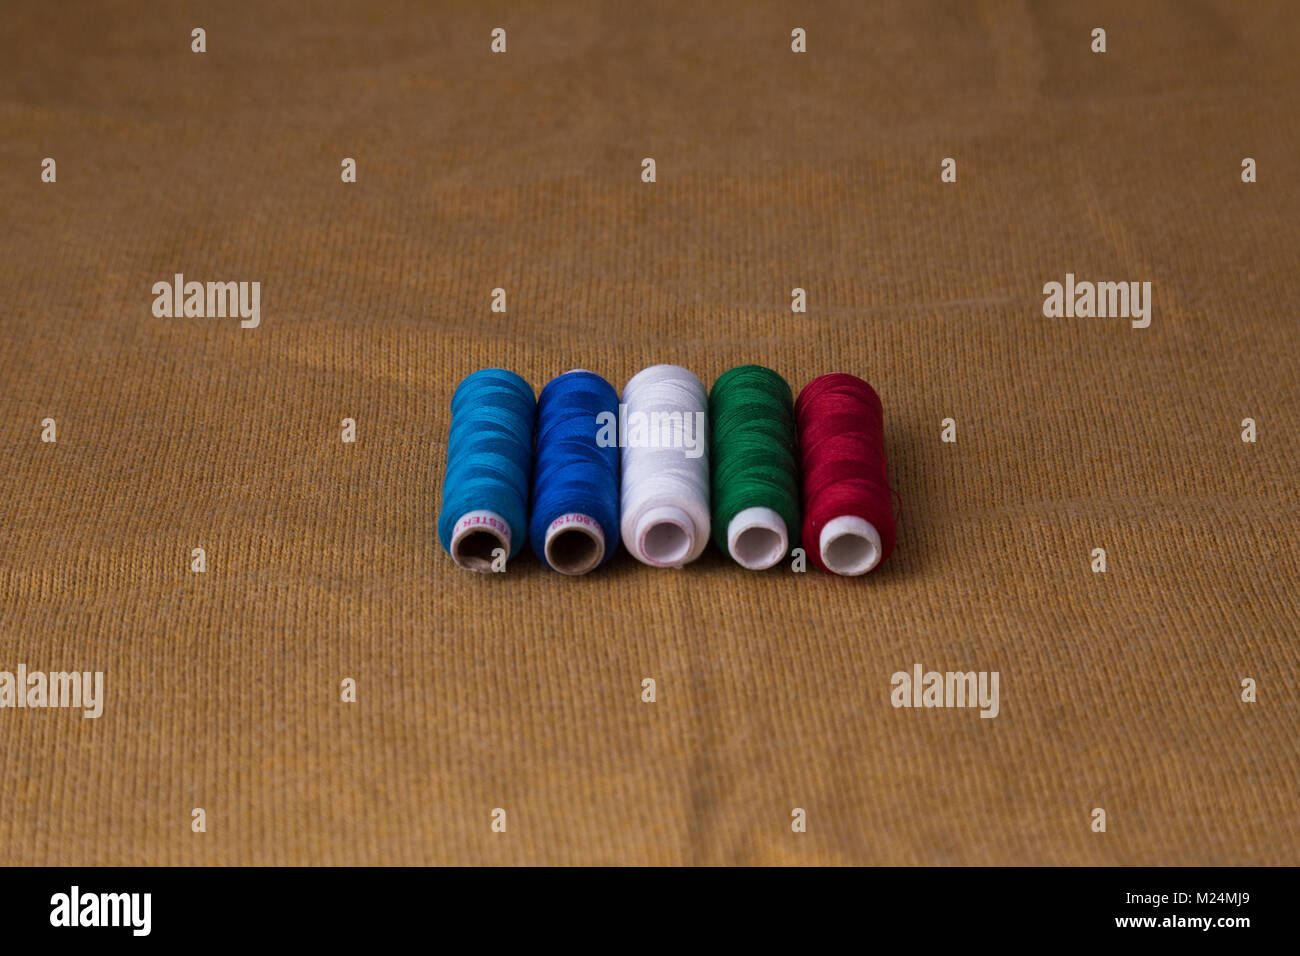 Colourful Sewing Threads Stock Photo